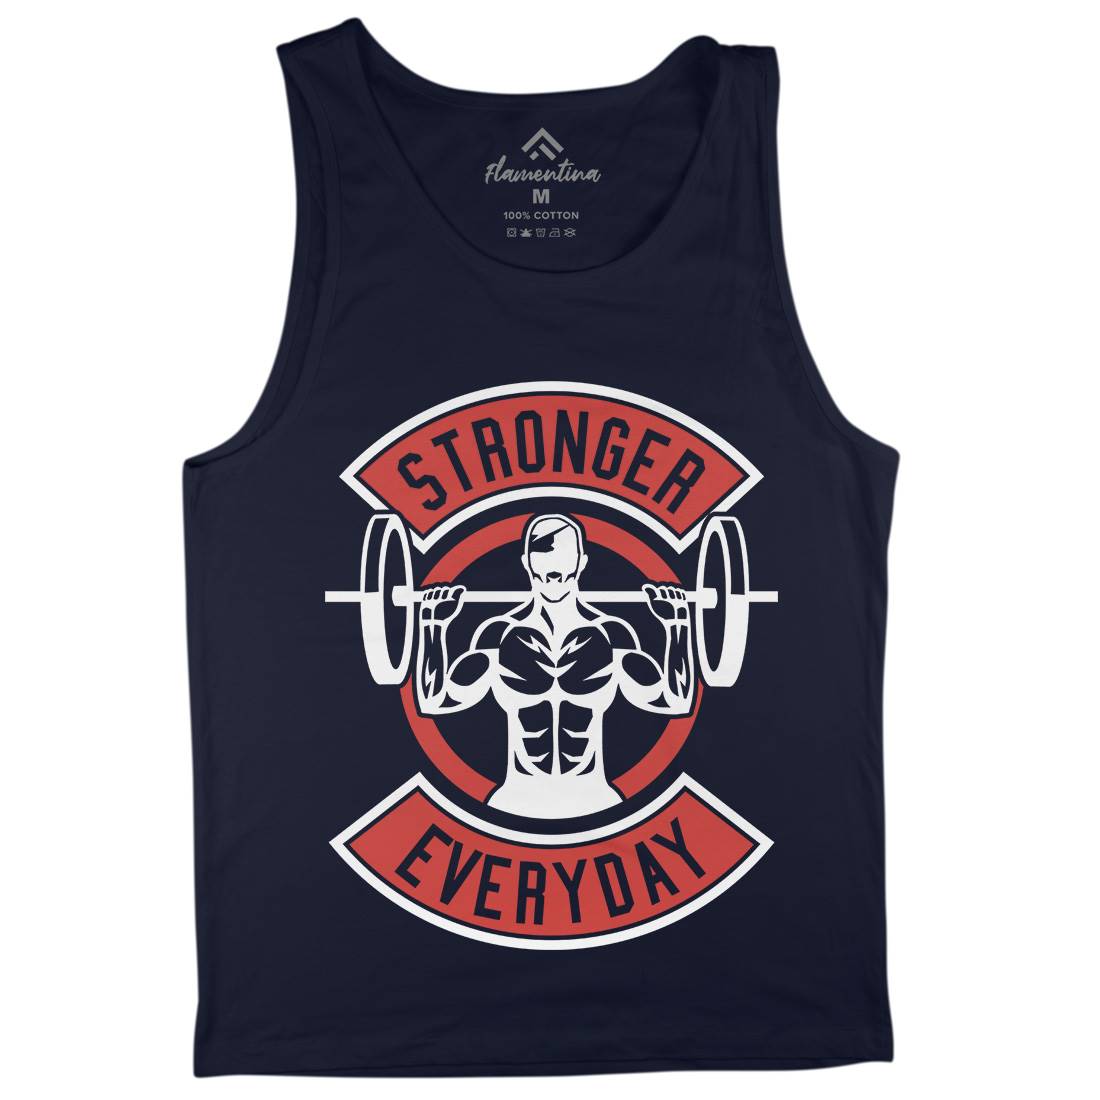 Stronger Everyday Mens Tank Top Vest Gym A289